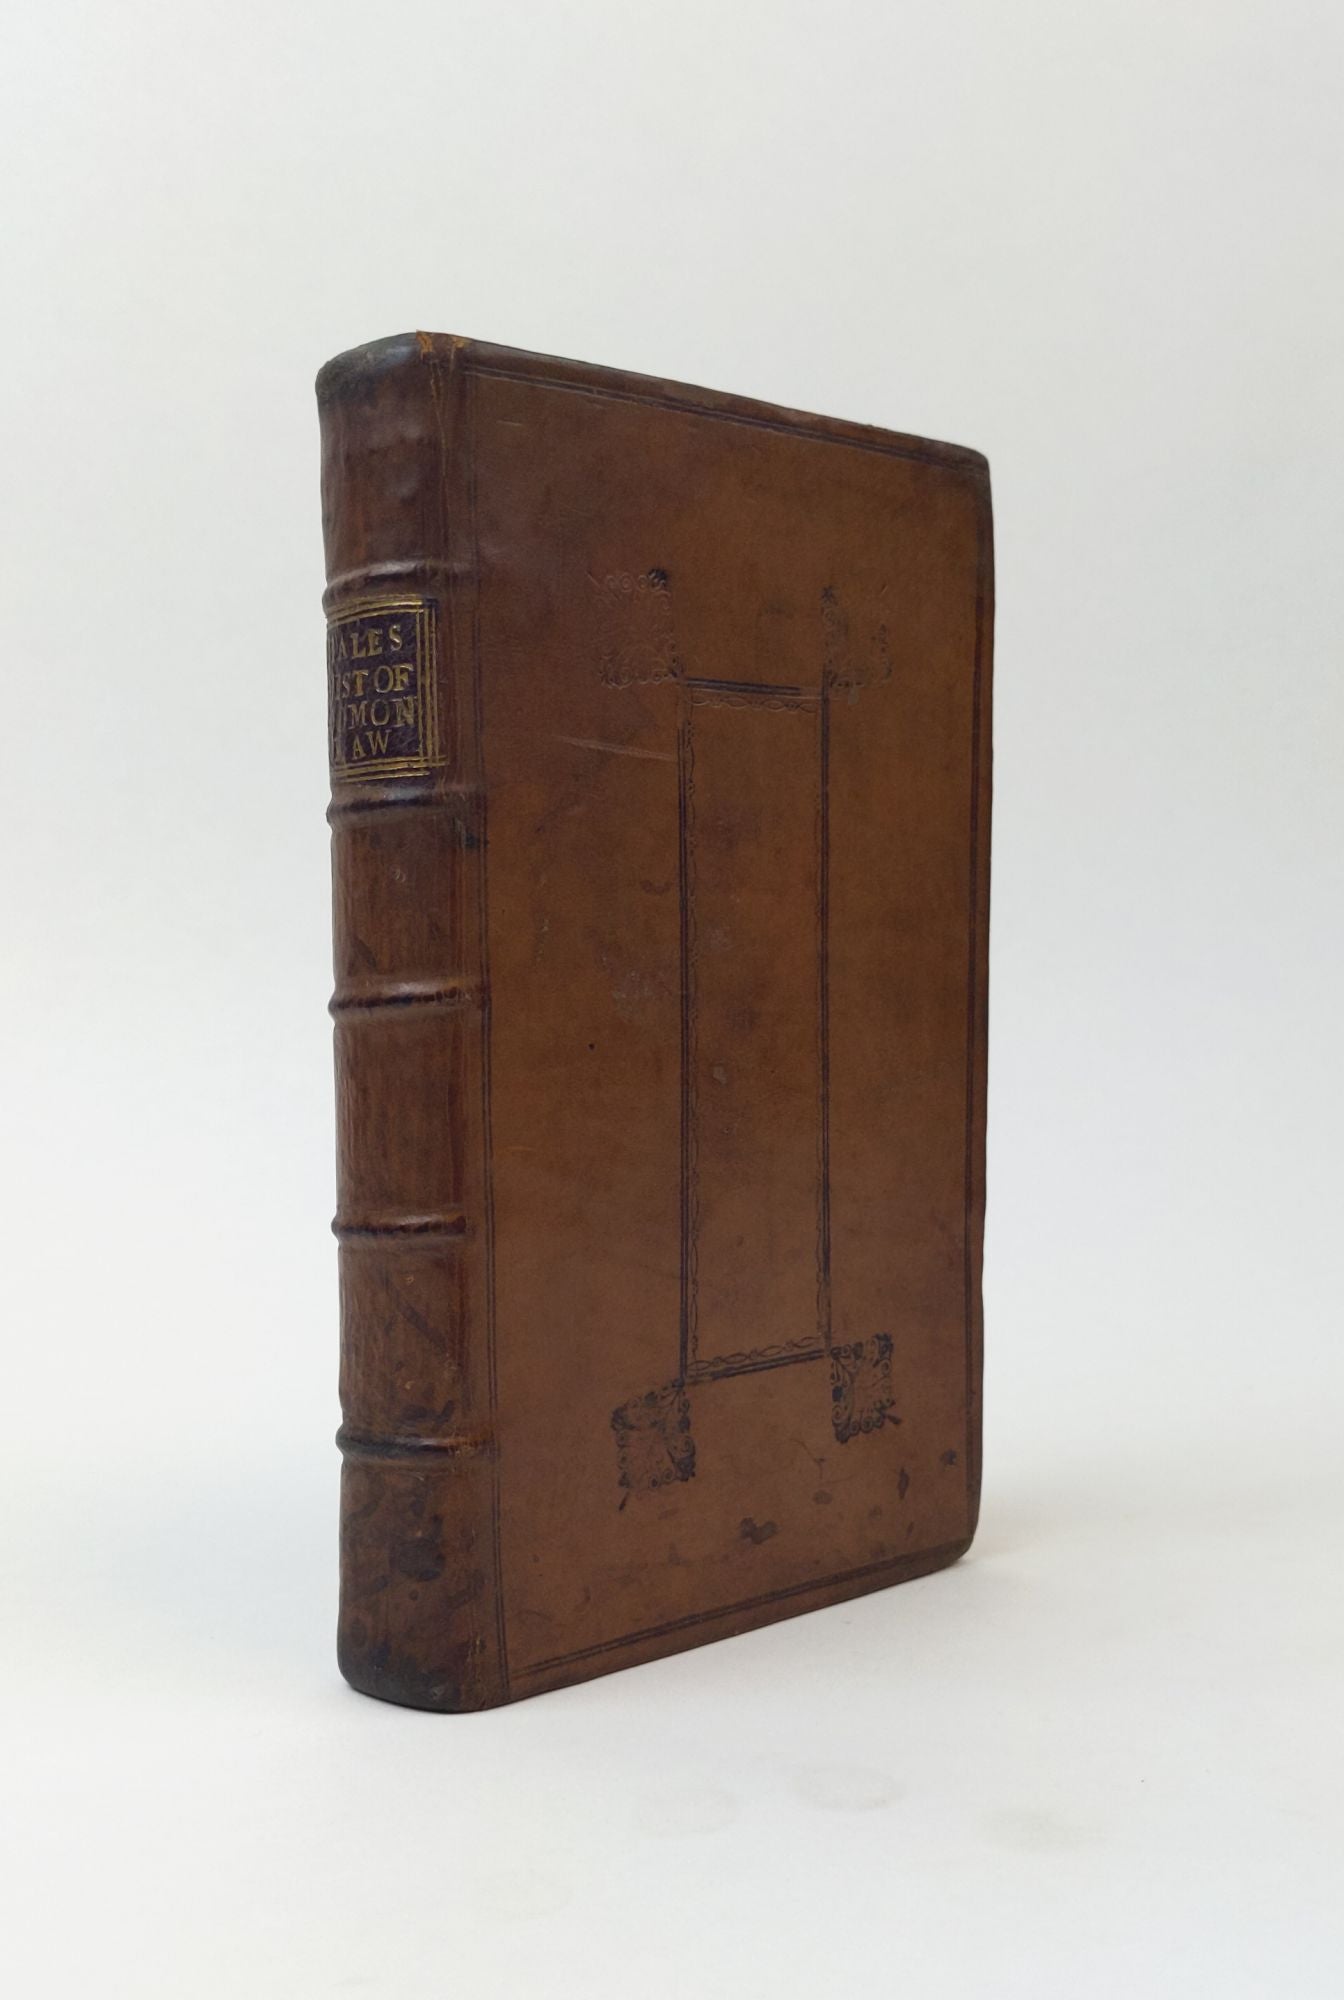 Product Image for The History of the Common Law of England [bound with] The Analysis of the Law..